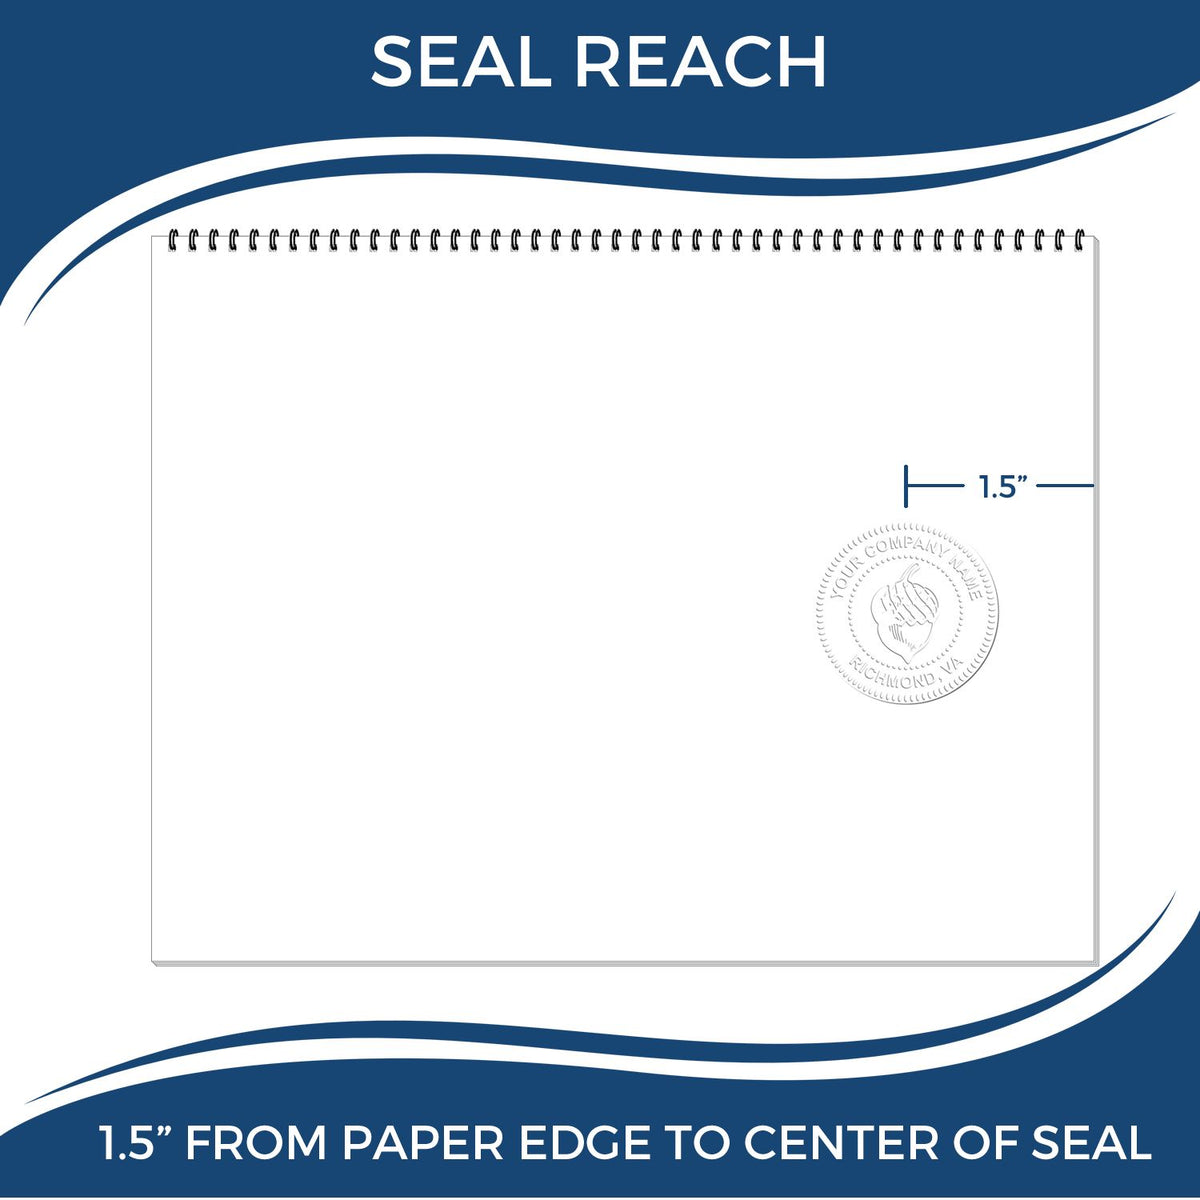 An infographic showing the seal reach which is represented by a ruler and a miniature seal image of the Hybrid Utah Architect Seal